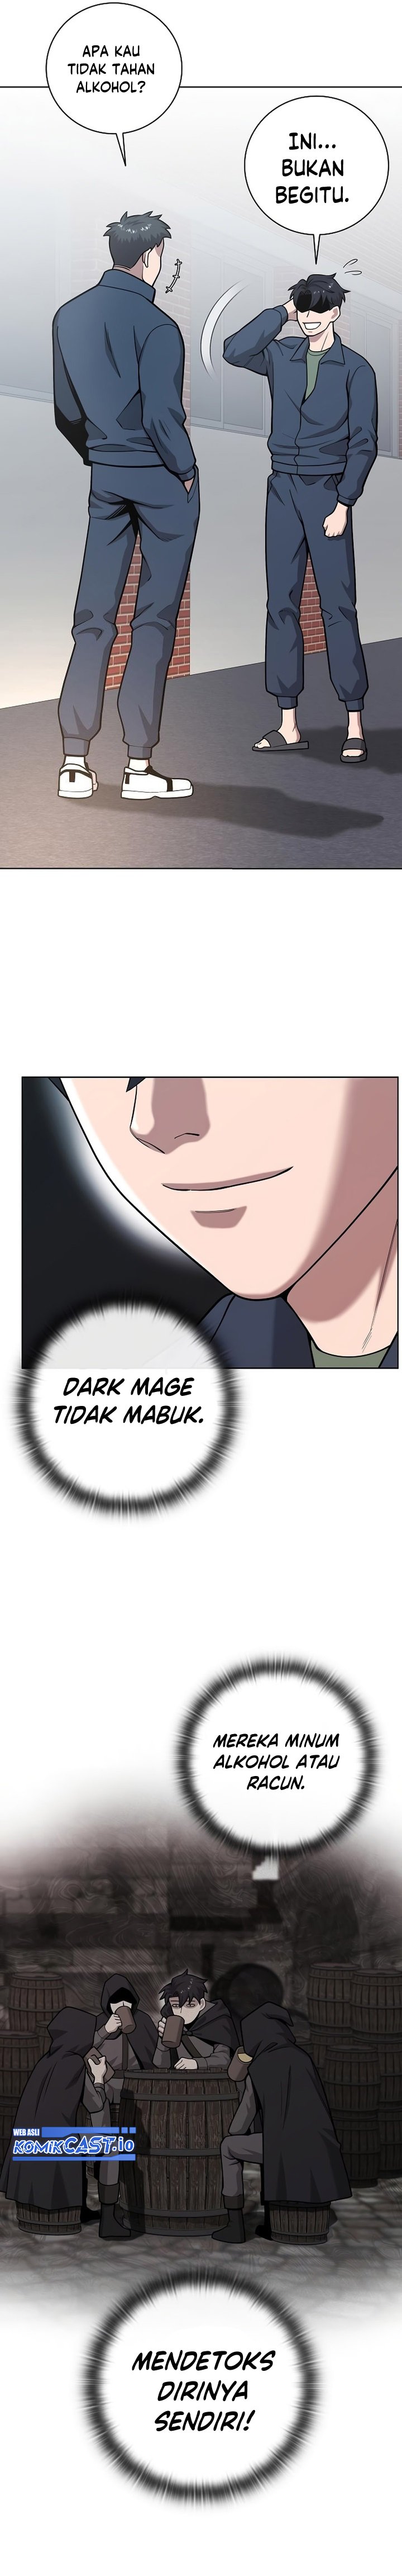 The Dark Mage’s Return To Enlistment Chapter 19